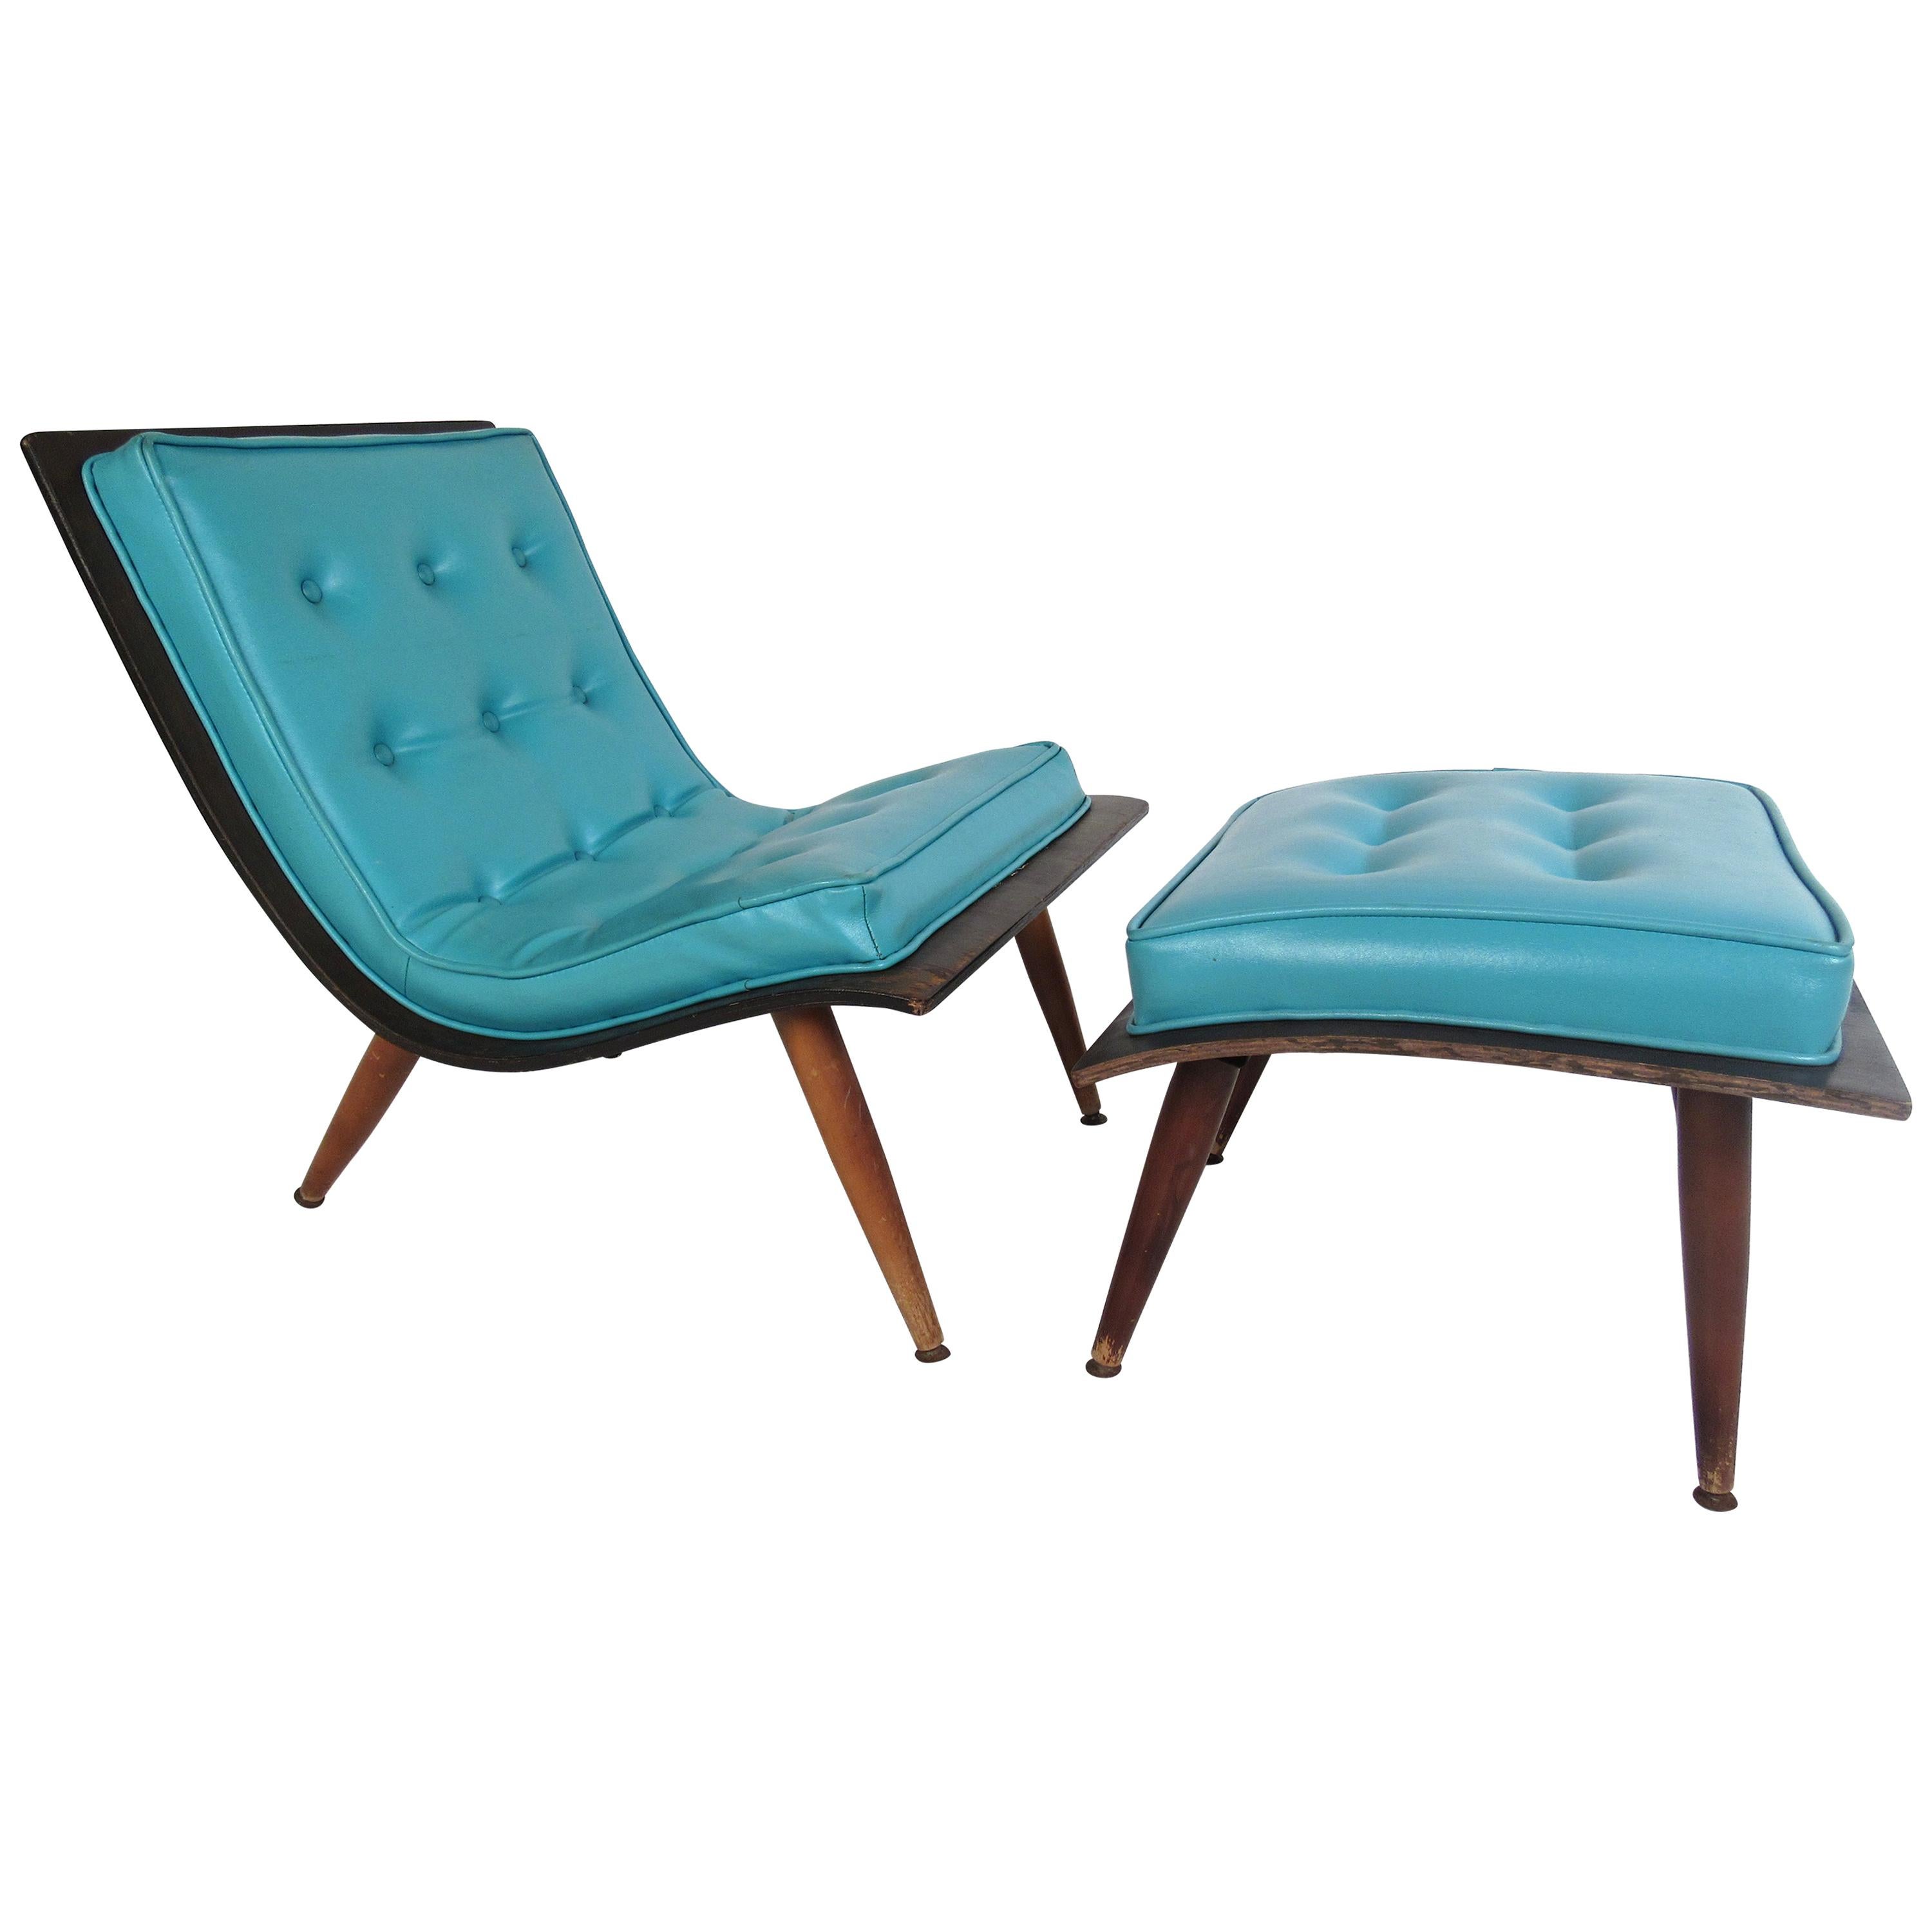 Midcentury Scoop Chair with Ottoman